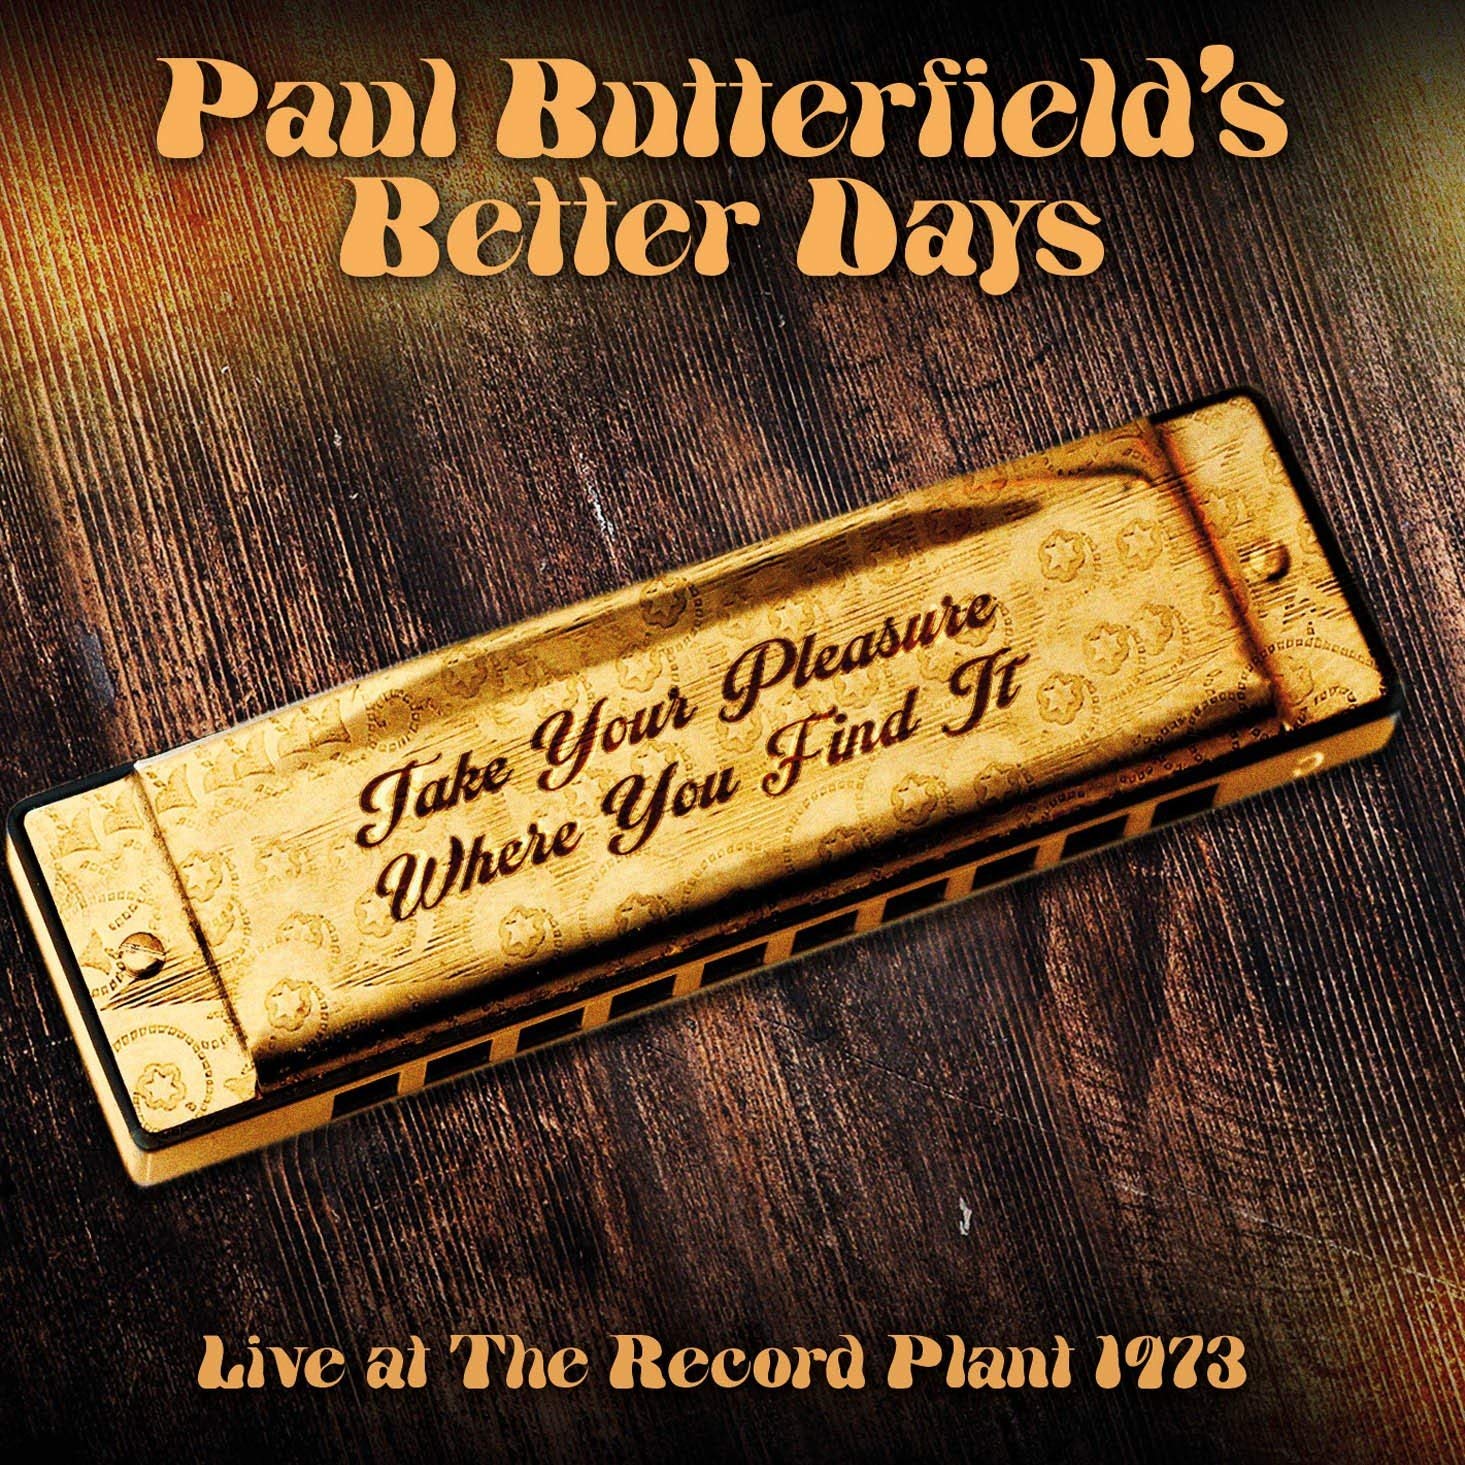 PAUL BUTTERFIELD'S BETTER DAYS / ポール・バターフィールズ・ベター・デイズ / TAKE YOUR PLEASURE WHERE YOU FIND IT - LIVE AT THE RECORD PLANT 1973